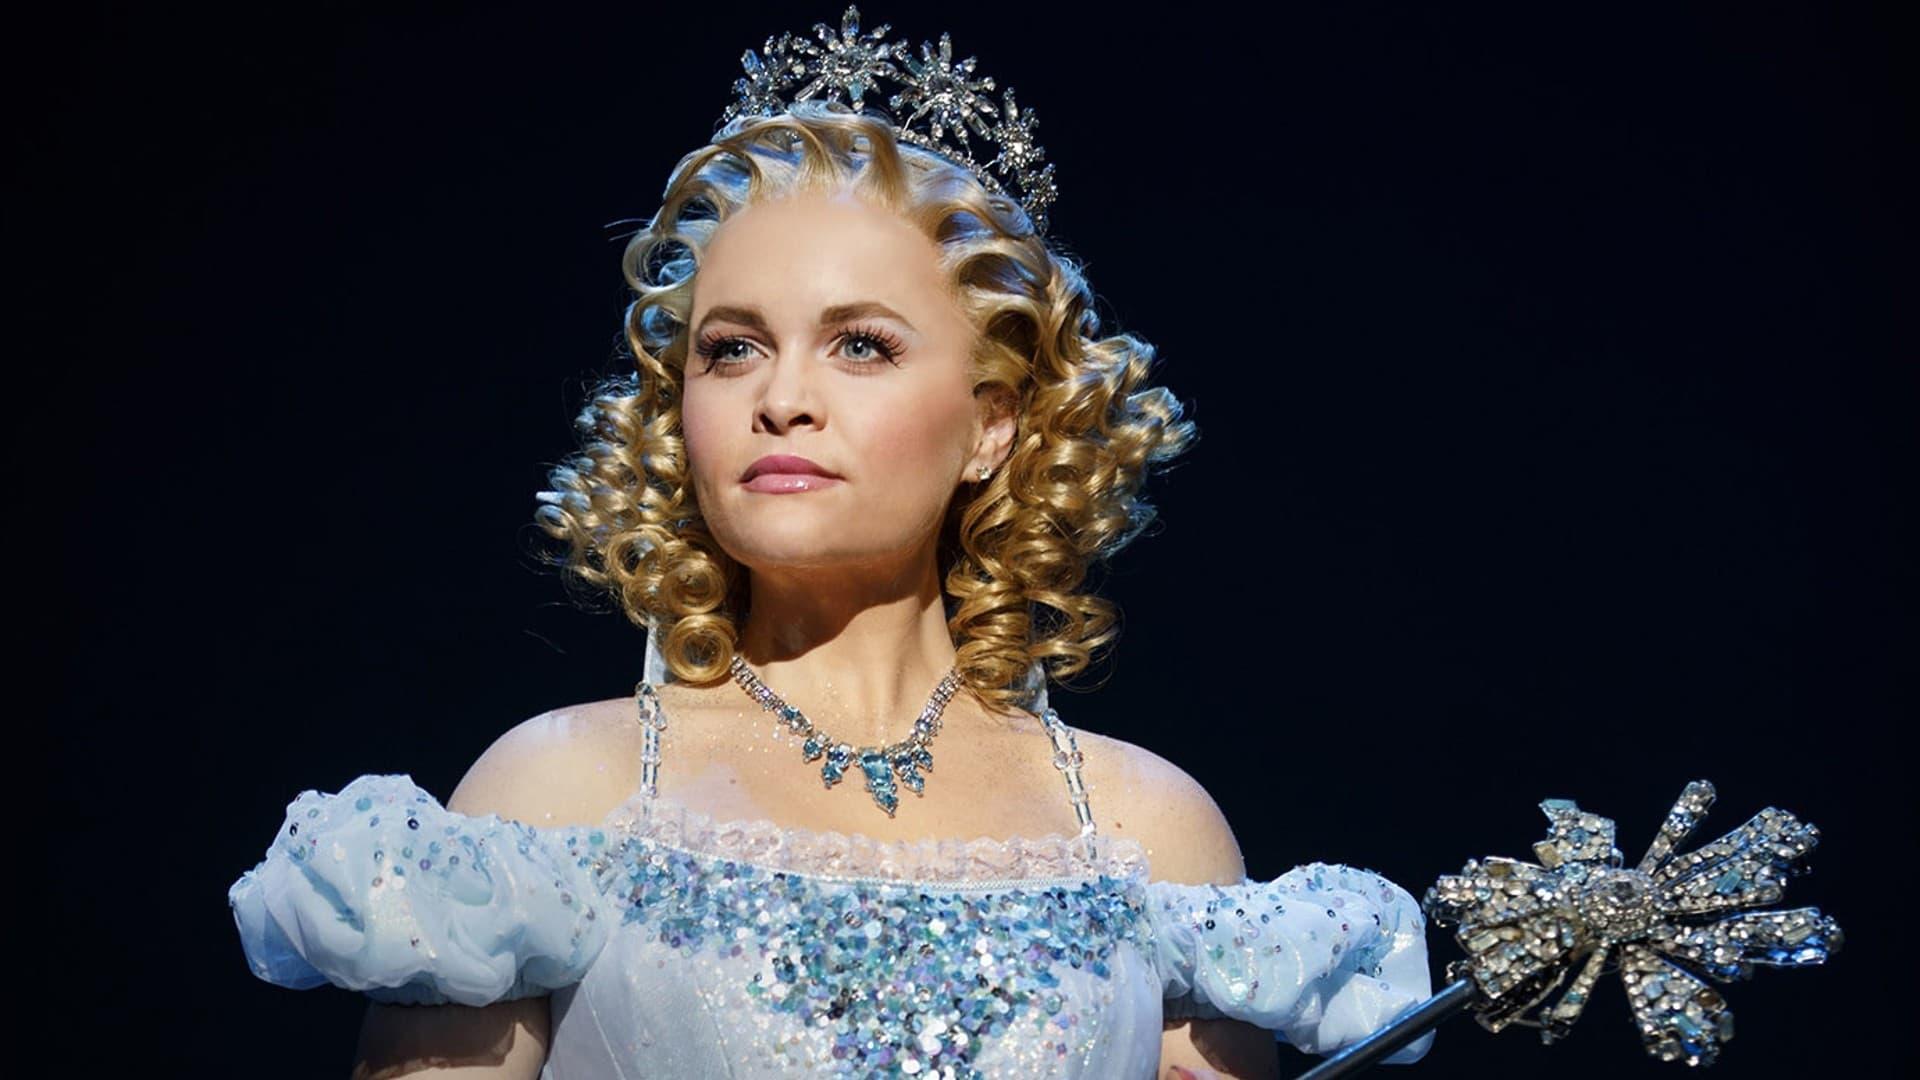 A Little Sparkle: Backstage at 'Wicked' with Amanda Jane Cooper backdrop